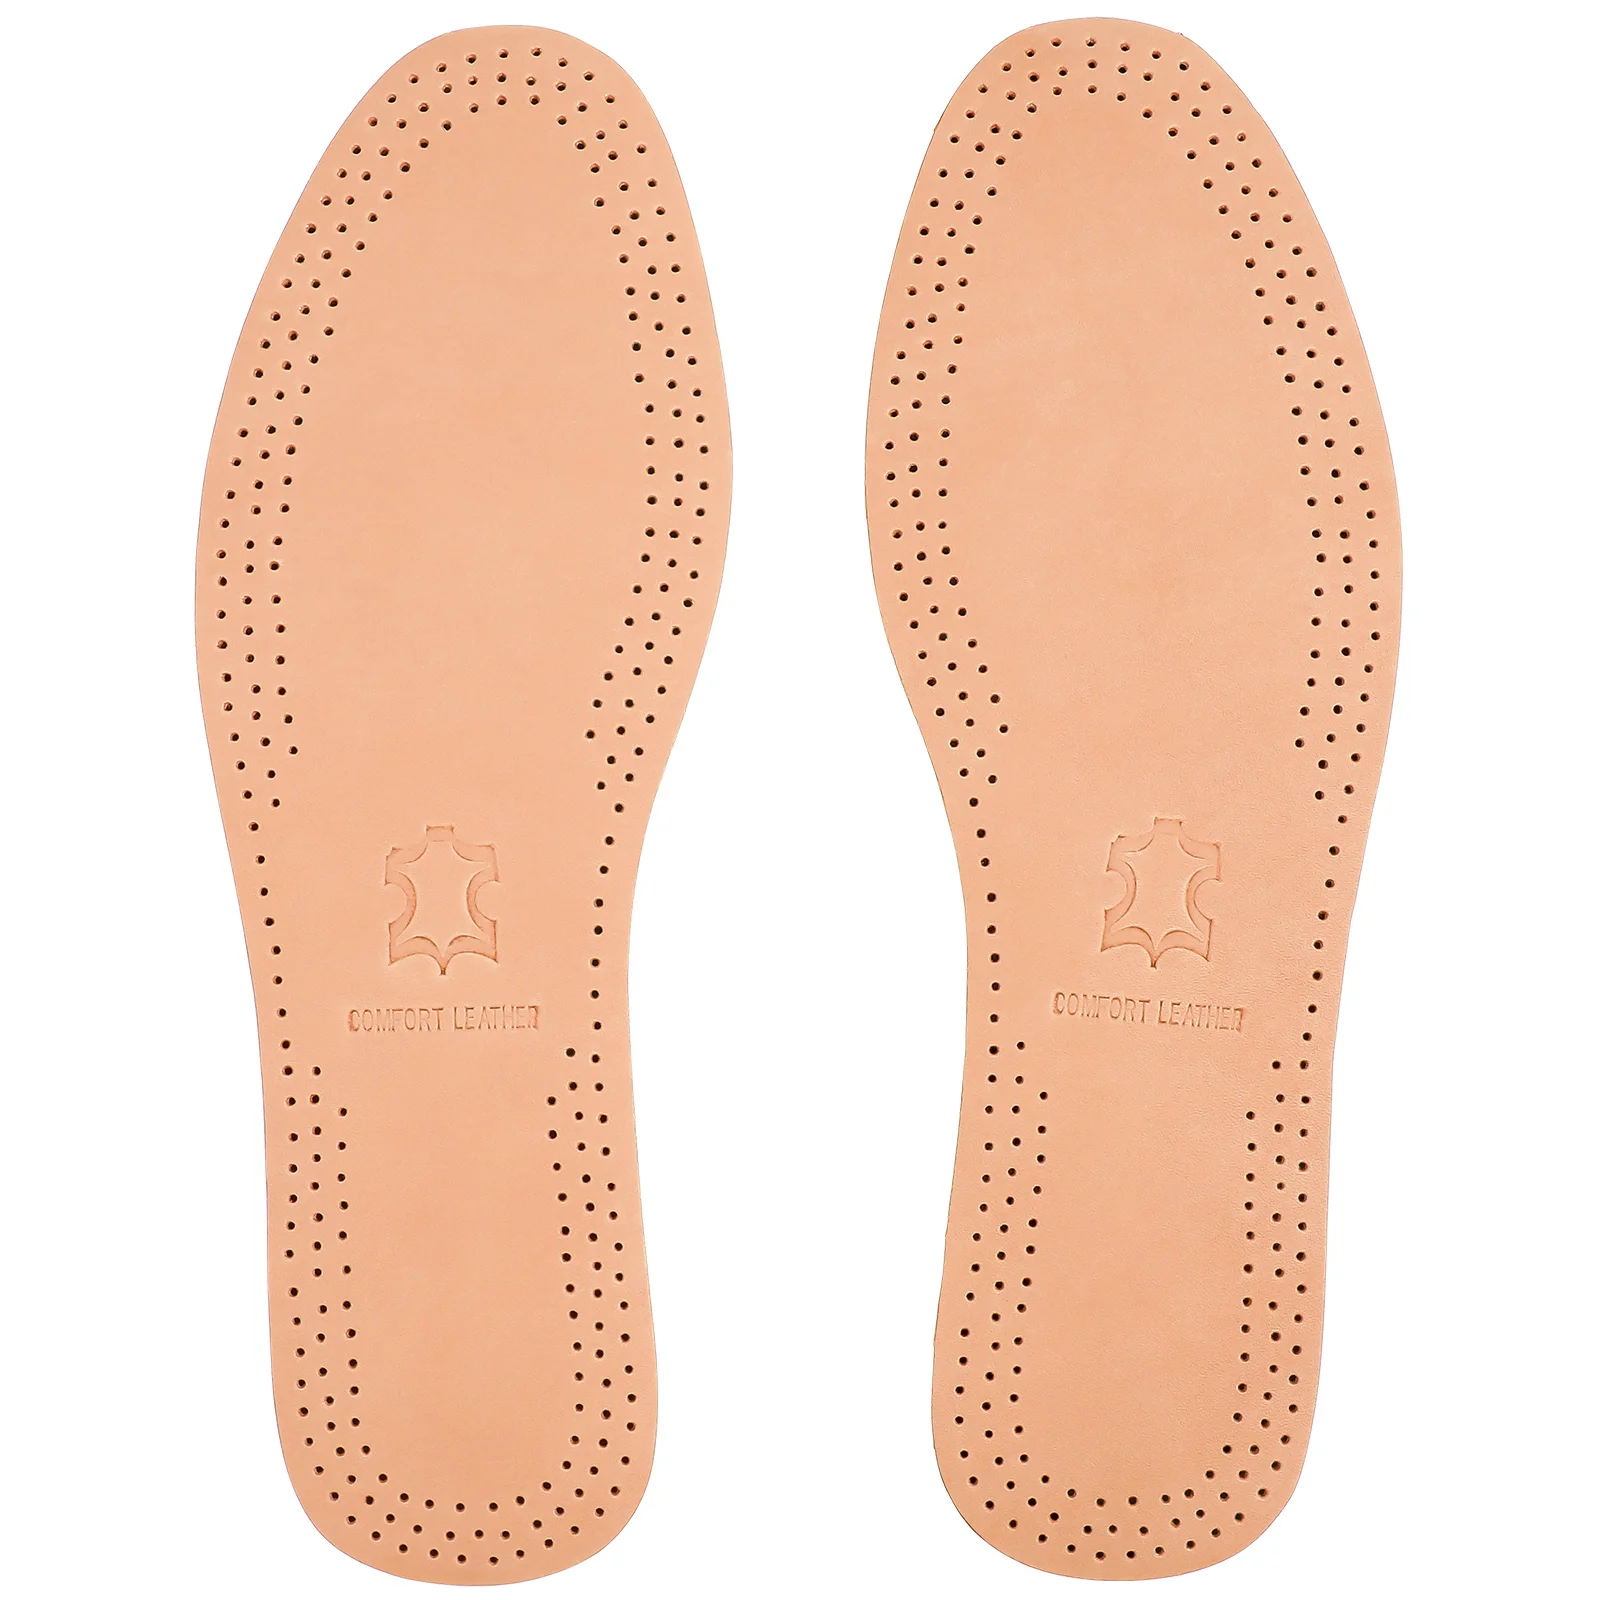 

1 Pair Comfort Insole Thin Breathable Absorb Sweat Insert Style Latex Insole Pads Size 39-40